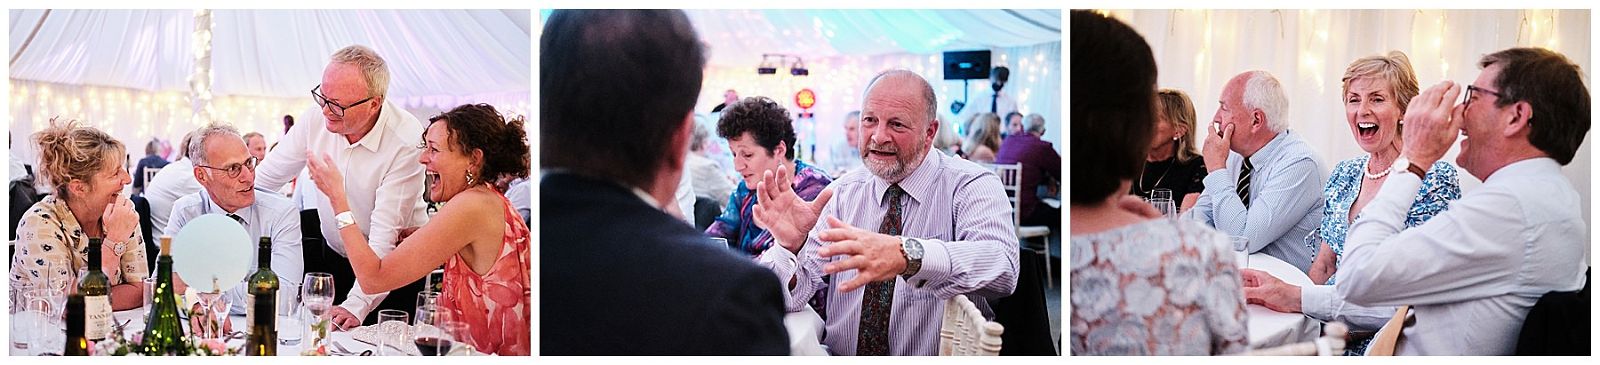 Natural photographs of the guests enjoying the wedding breakfast and evenings celebrations at Goldstone Hall in Shropshire by Documentary Wedding Photographer Stuart James